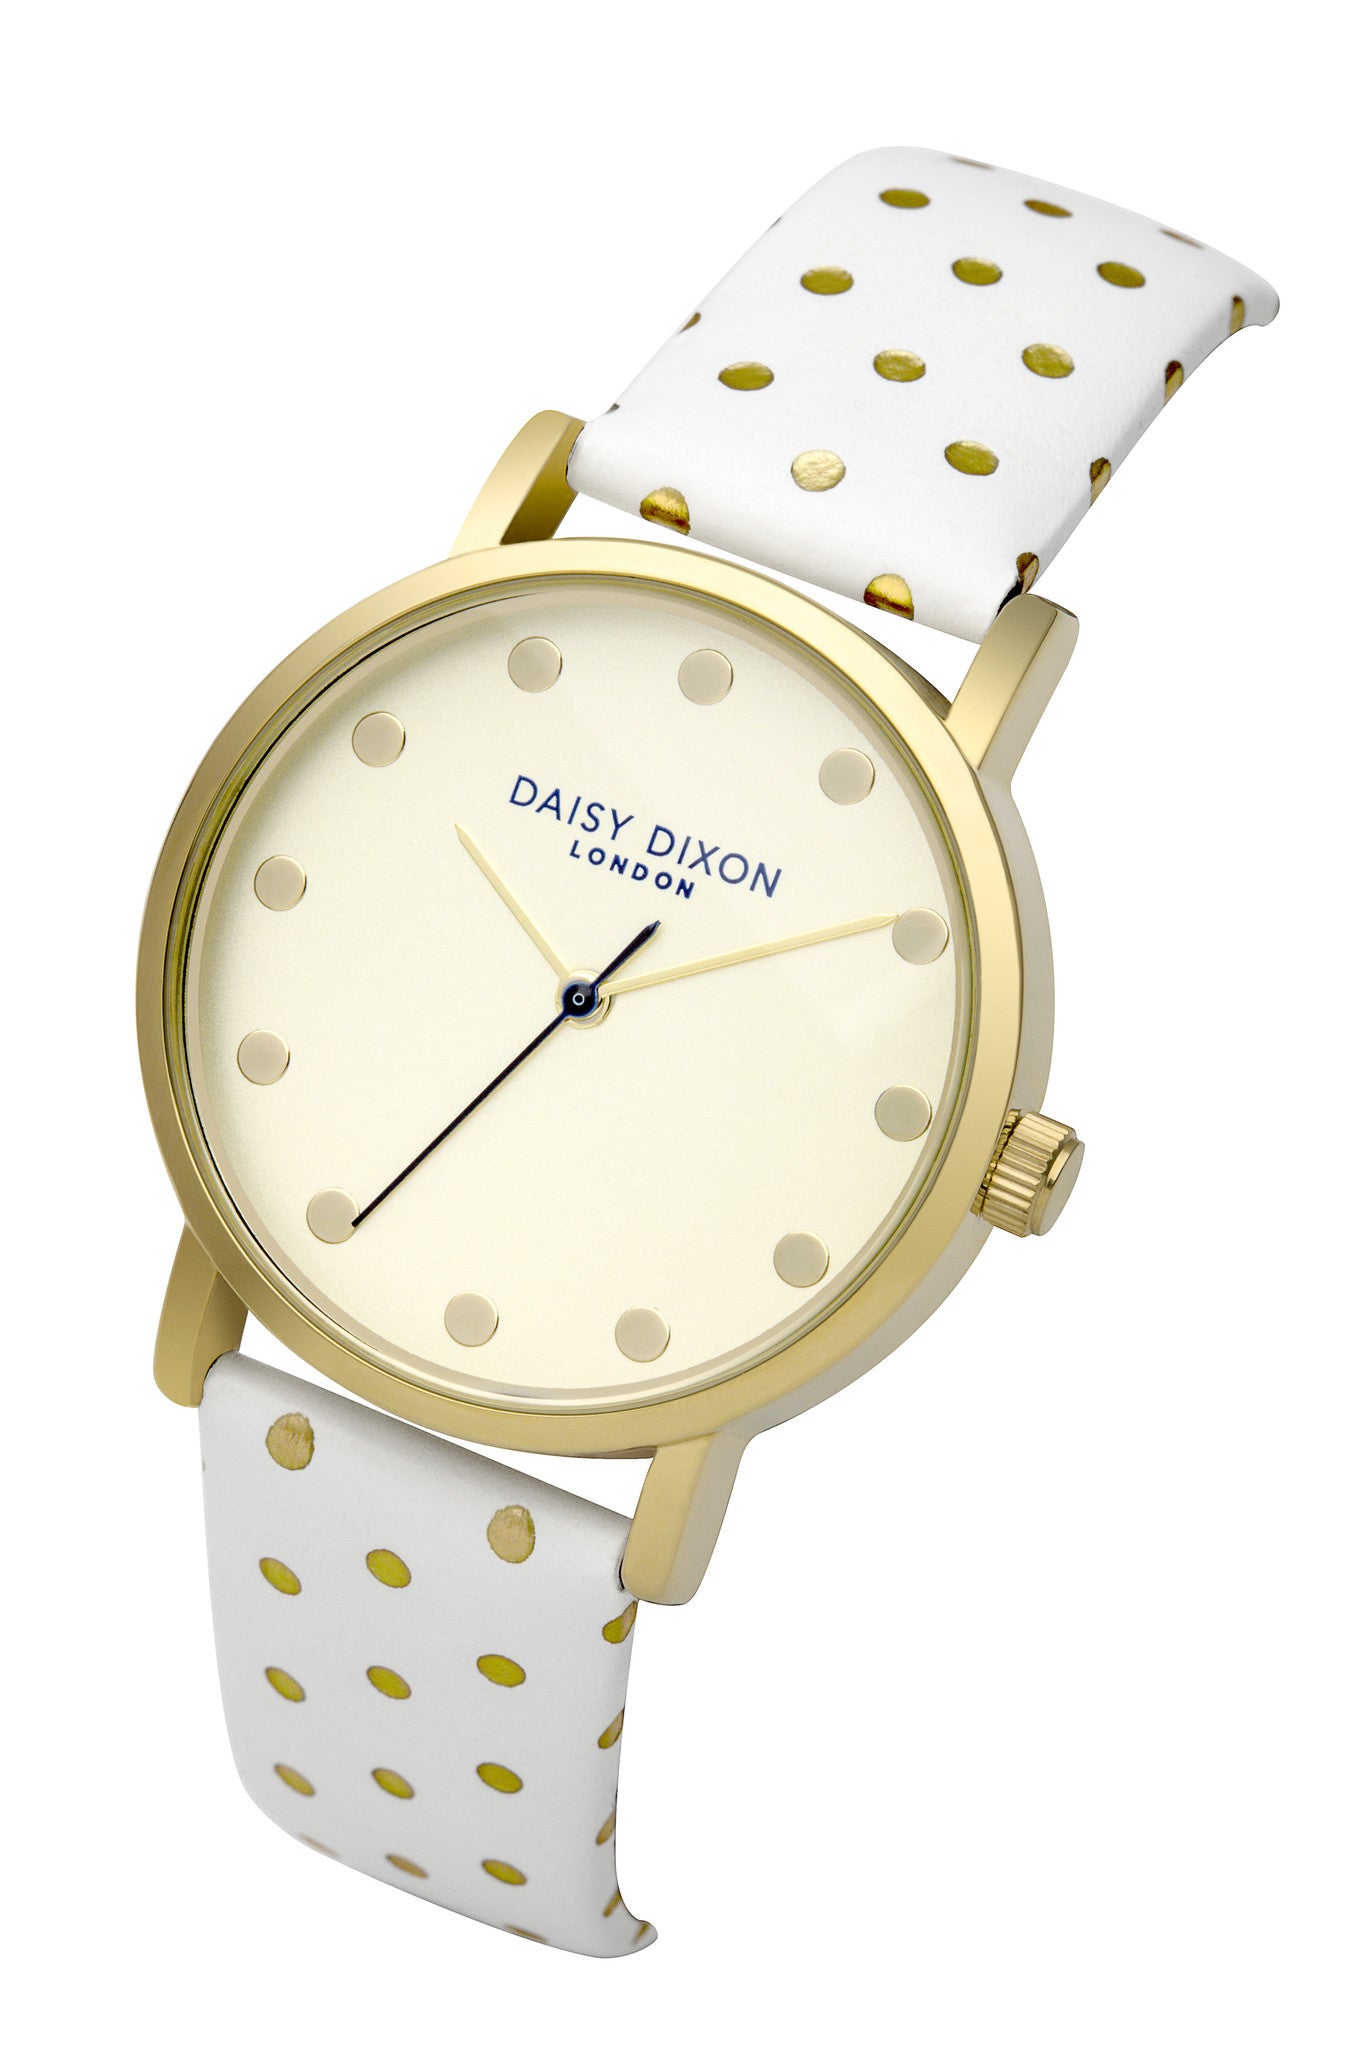 Candice Gold and White Polka Dot Watch - Stevens Jewellers Letterkenny Donegal